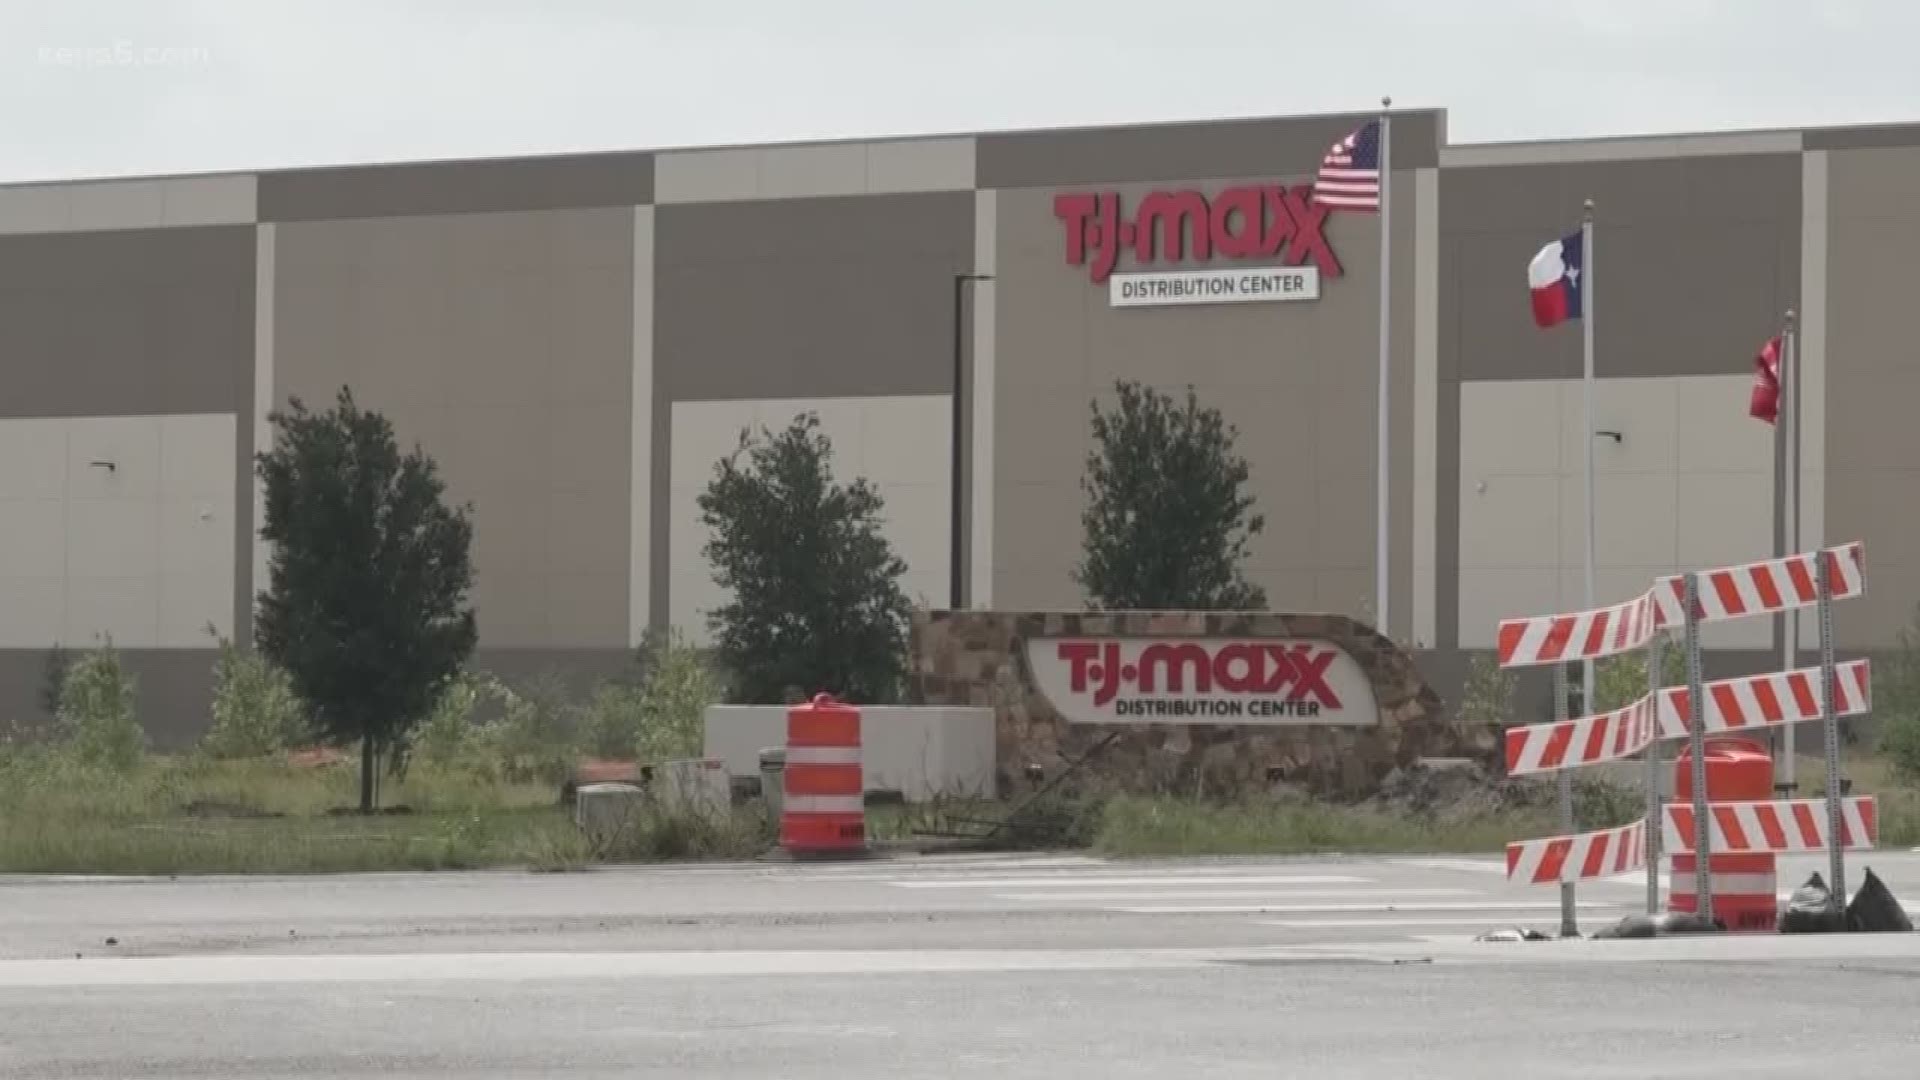 The openings come courtesy of T.J. Maxx, which announced a new distribution center coming to the Alamo City.